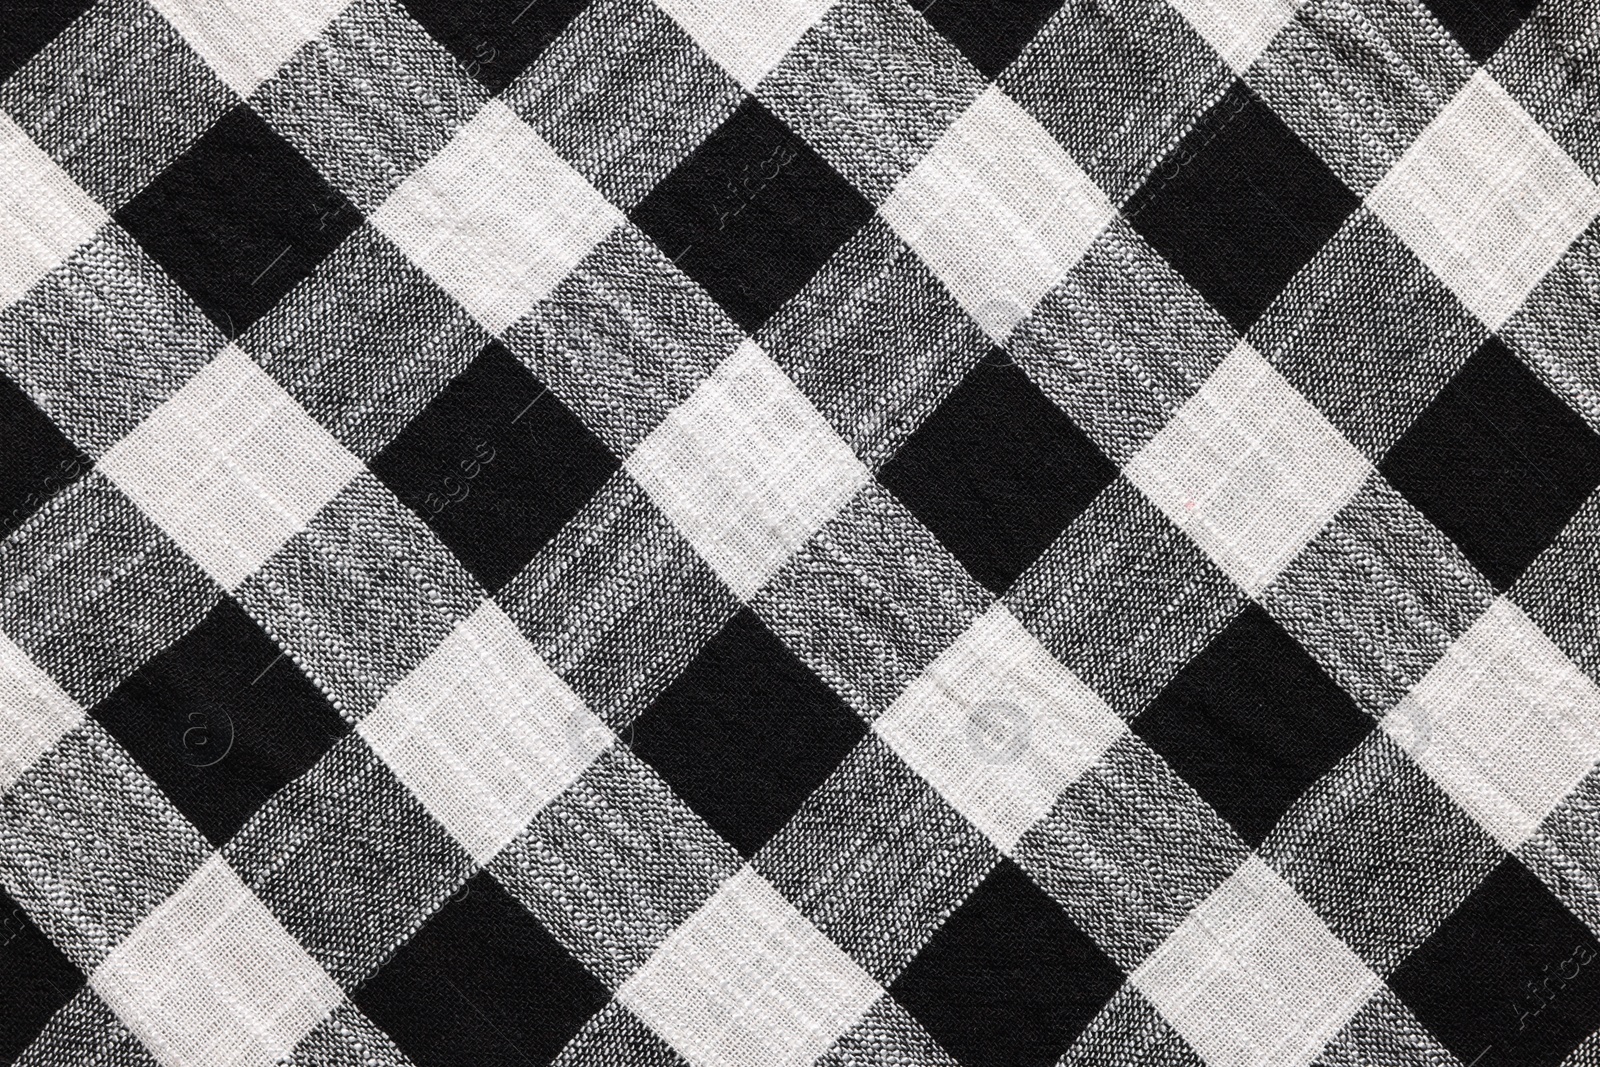 Photo of Black checkered tablecloth as background, top view